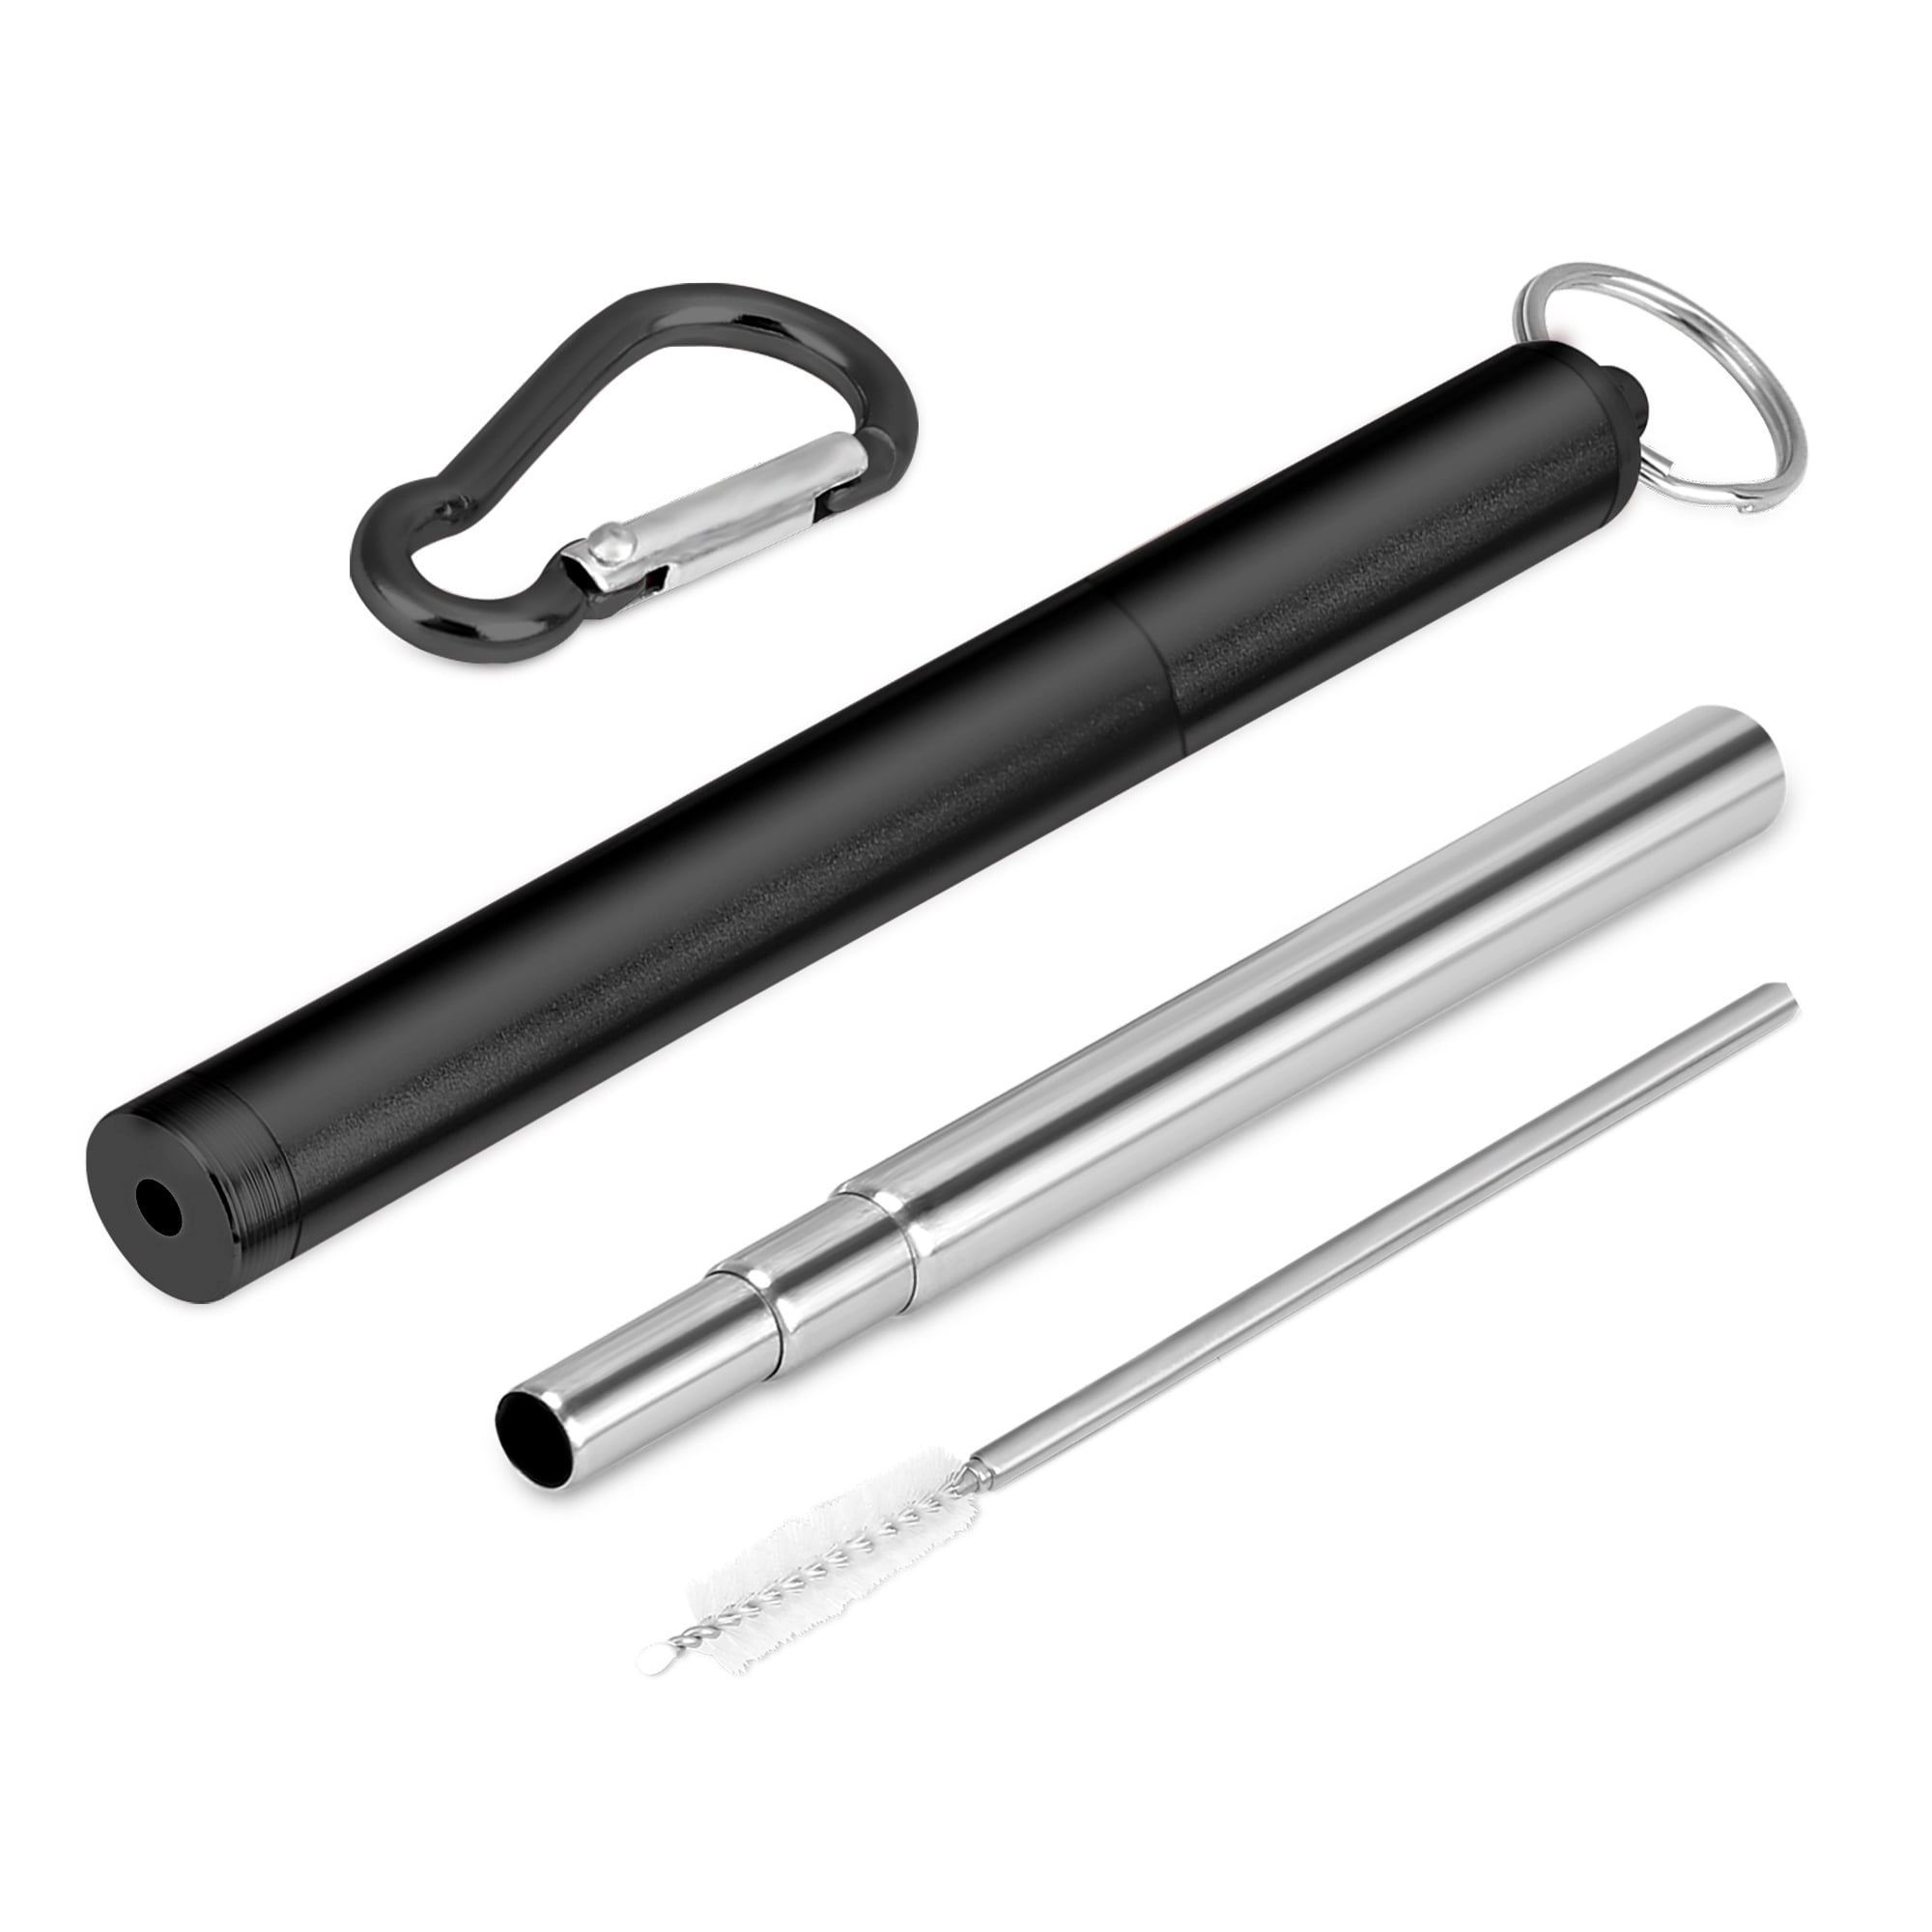 ADRWATER Telescopic Straw Portable Reusable Straws Stainless Steel Drinking Straw with Case and Telescopic Cleaning Brush 2 Pack Black&Black